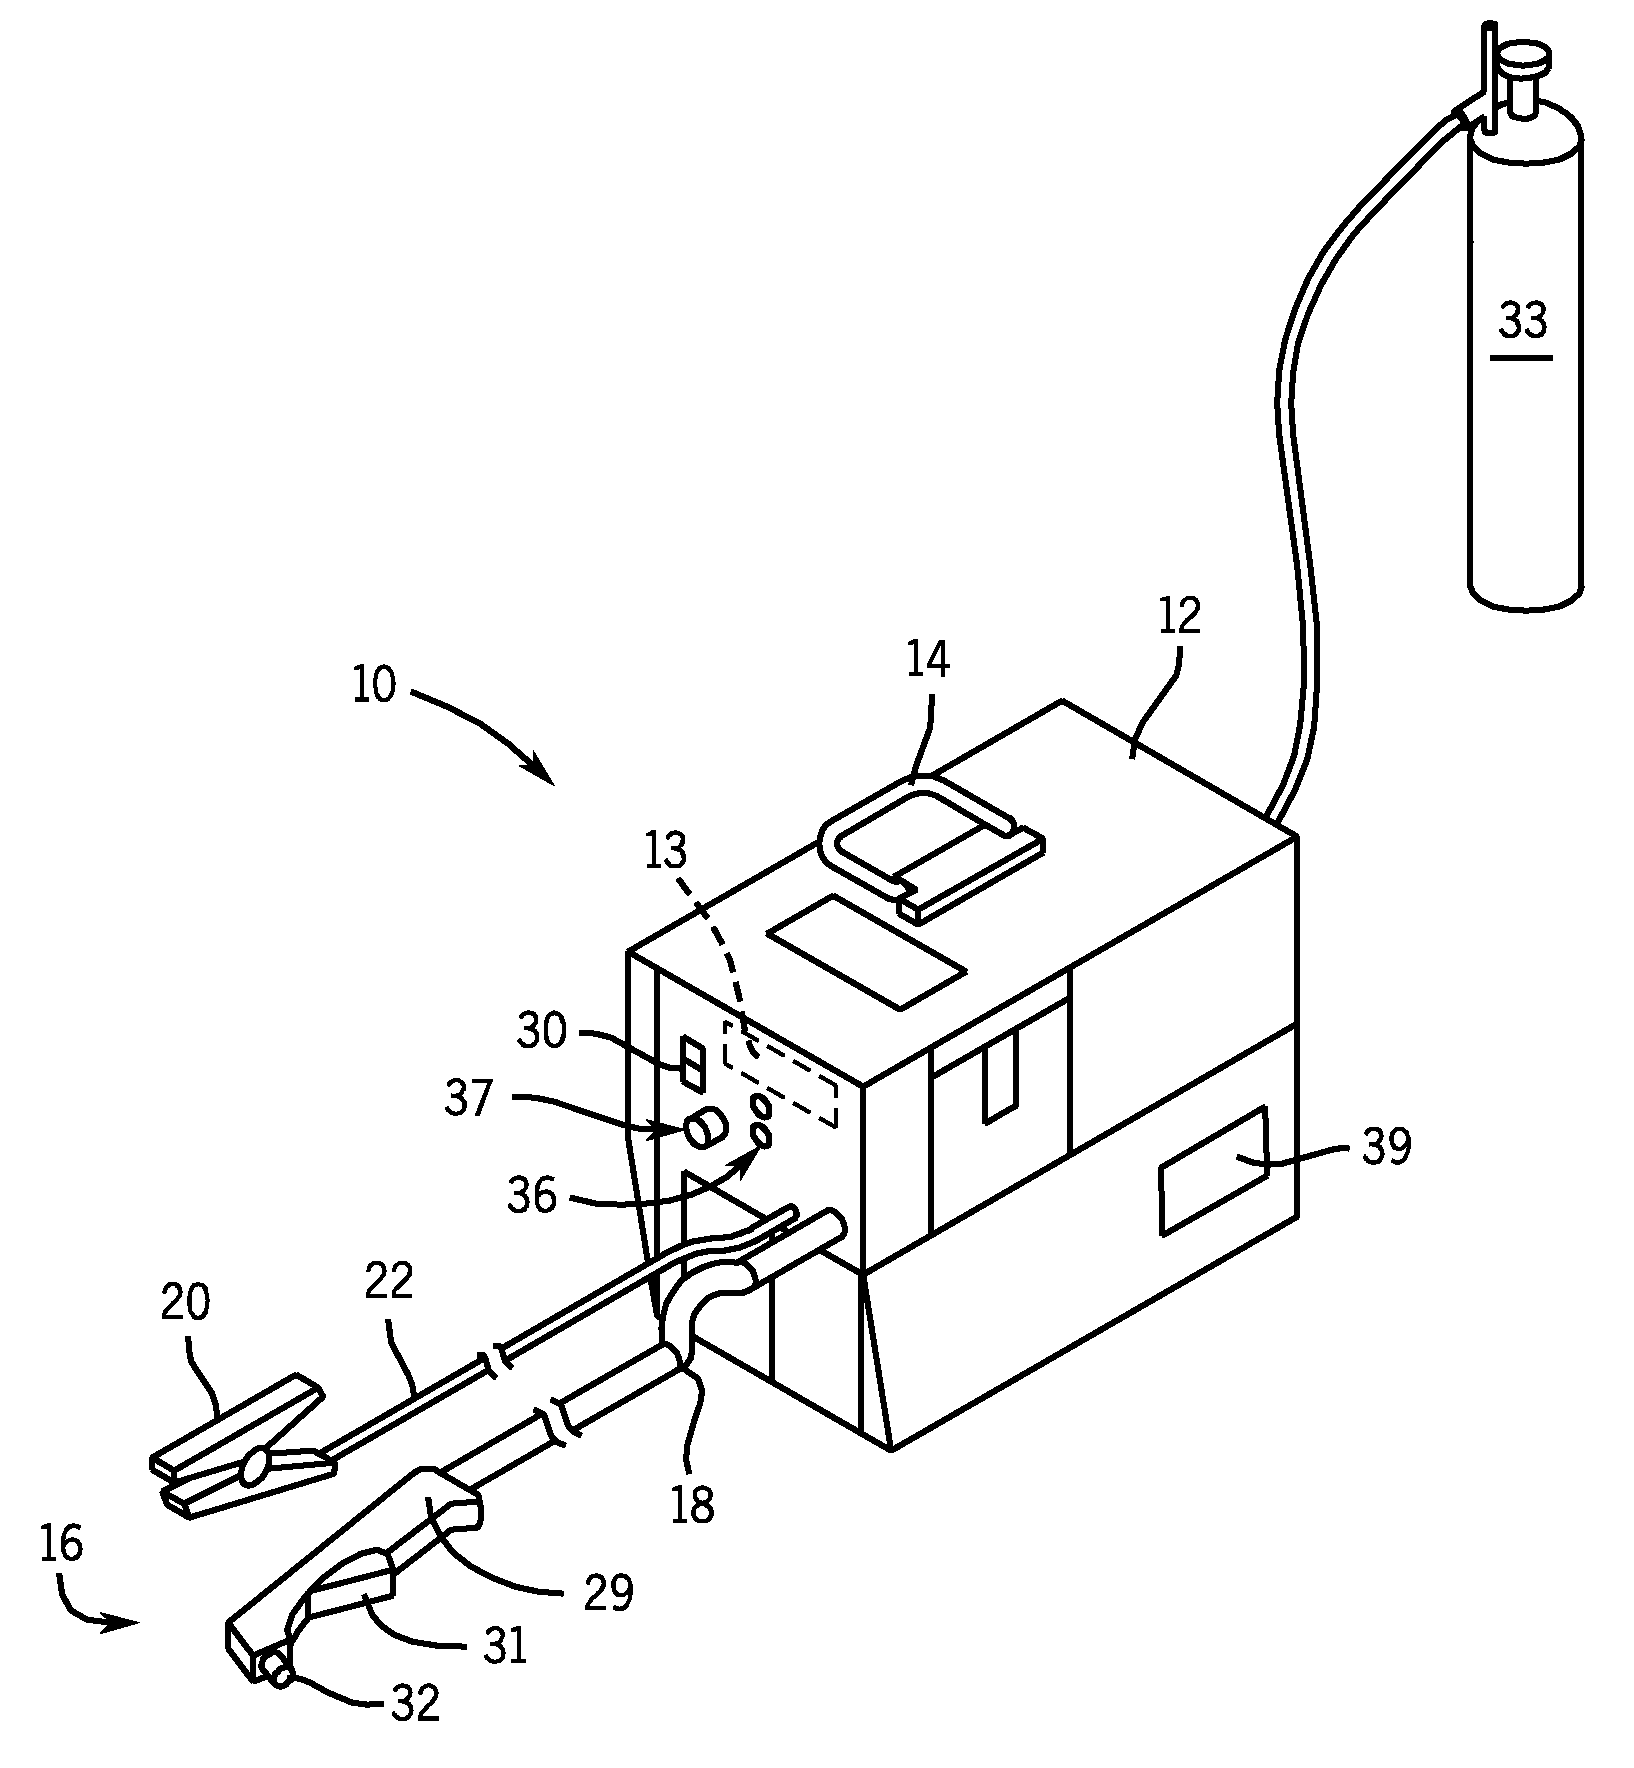 Method and apparatus for automatically controlling gas pressure for a plasma cutter